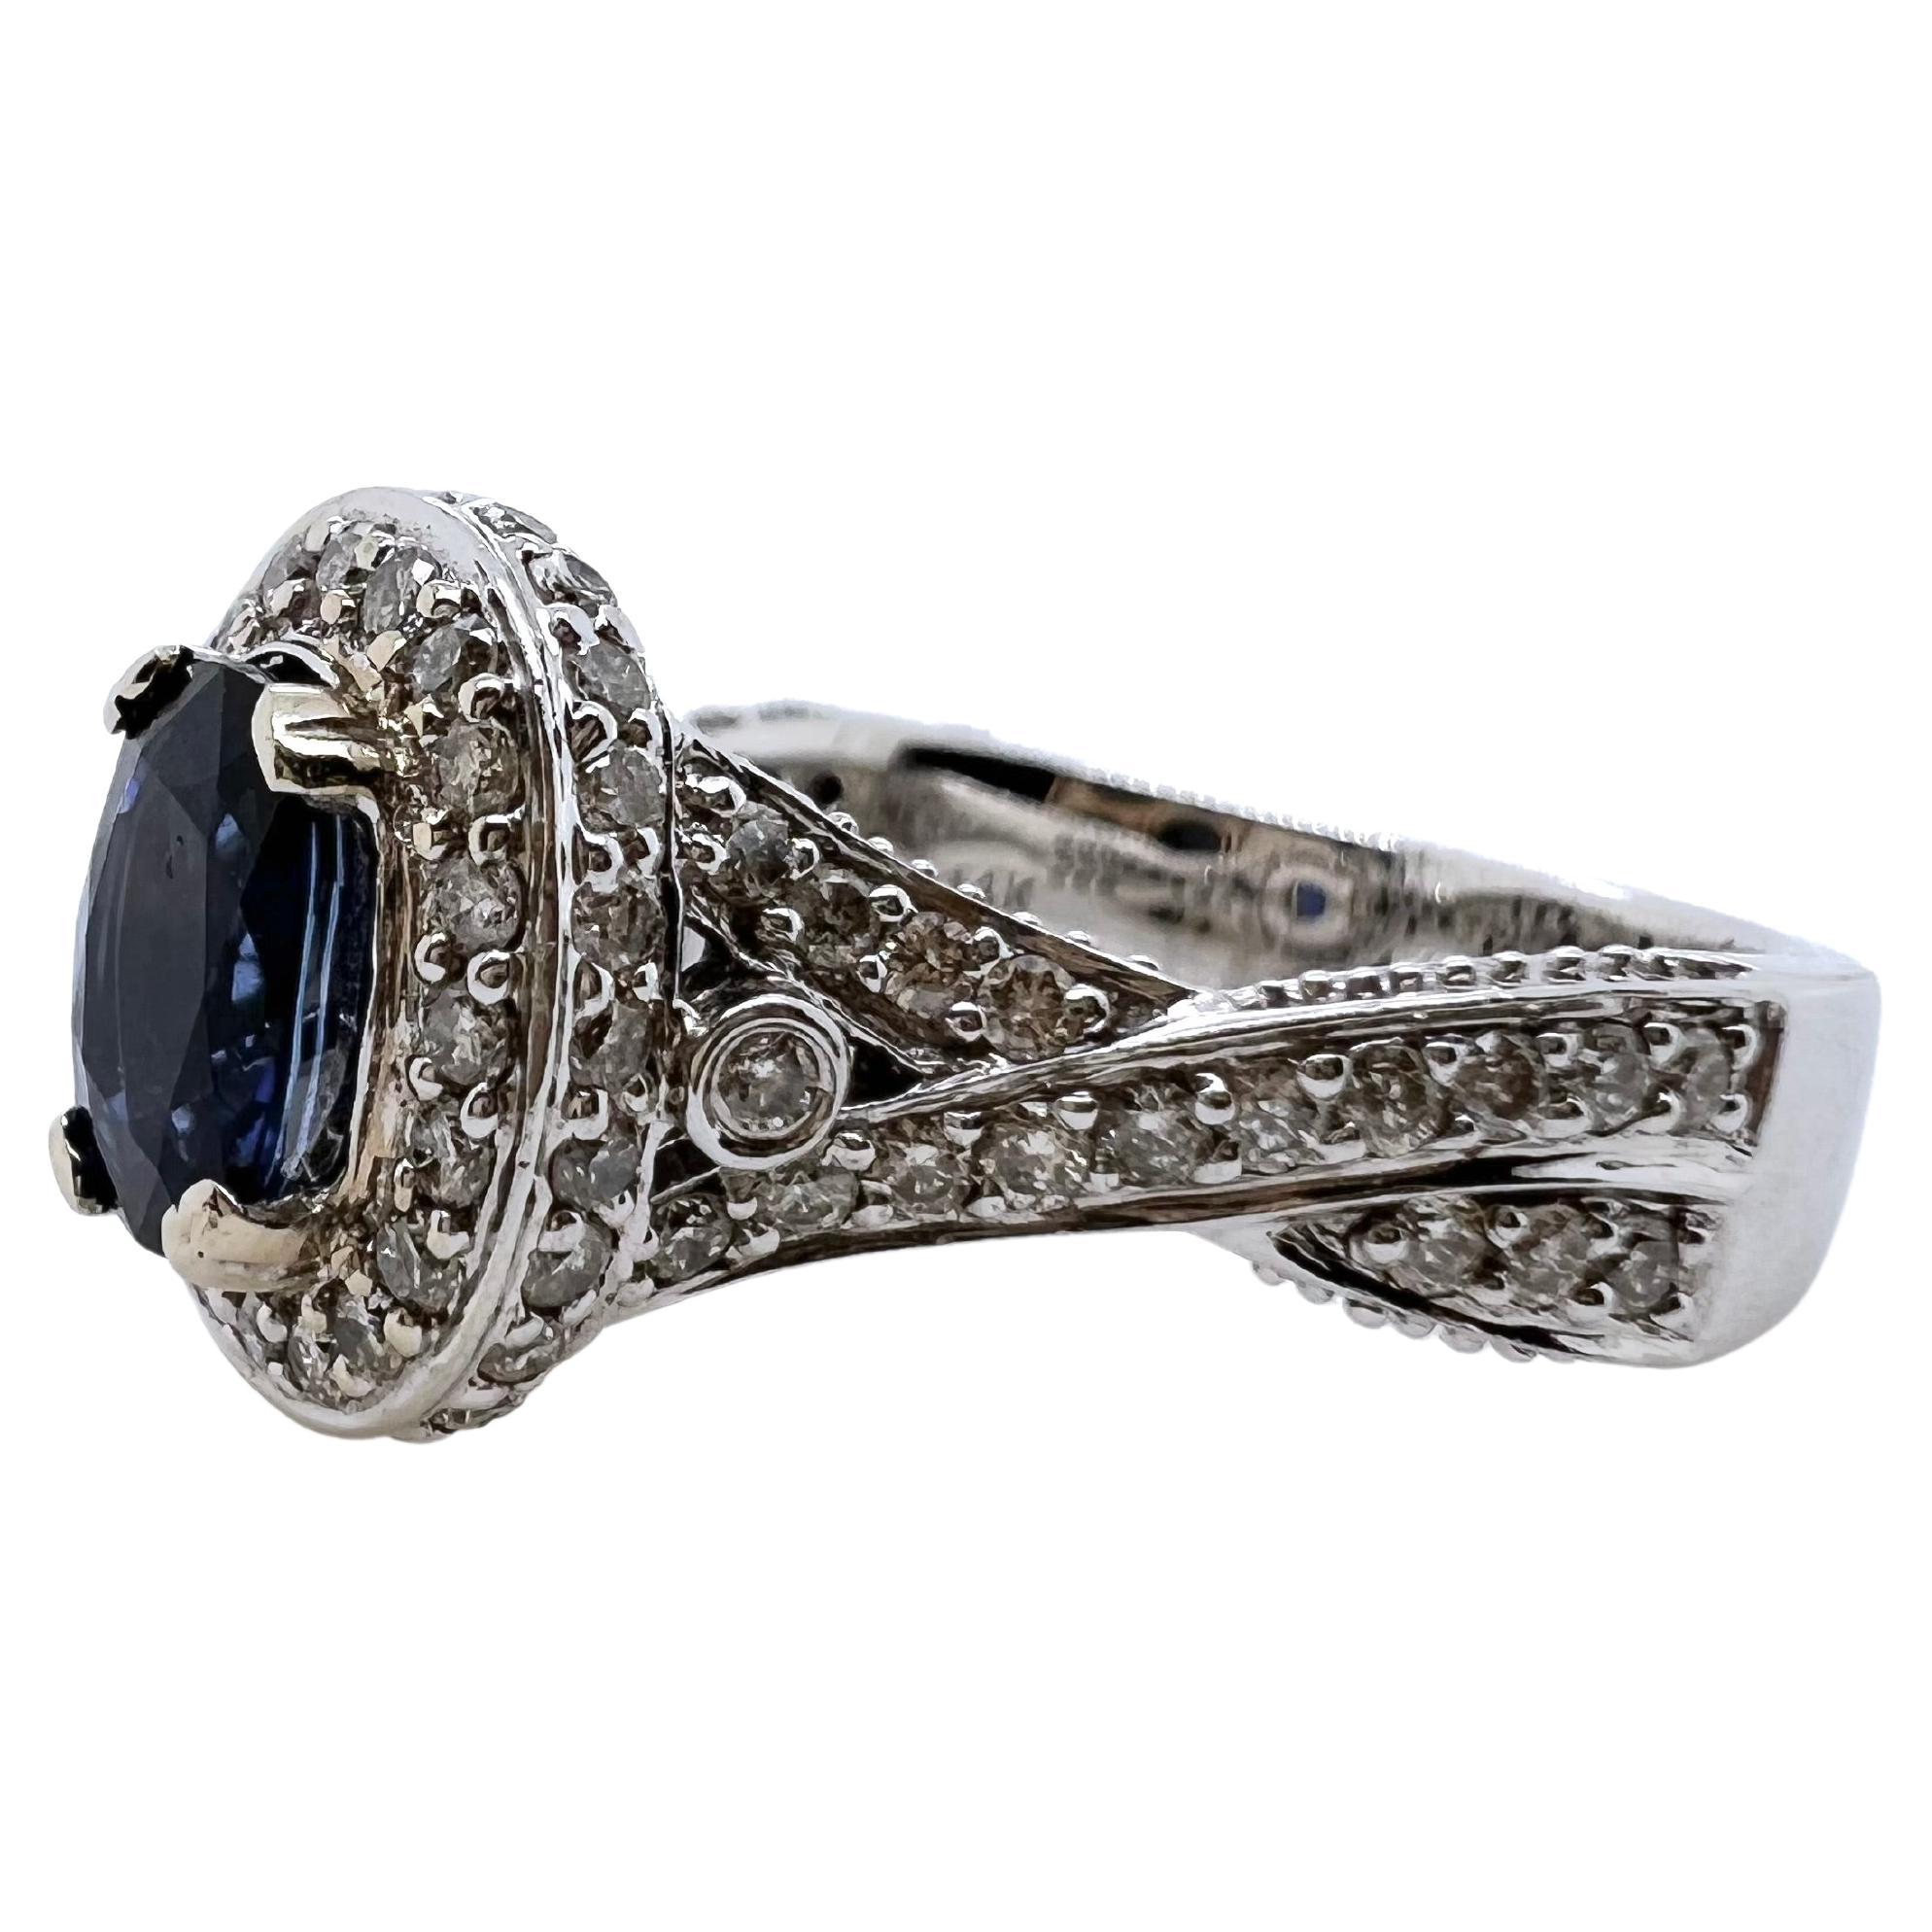 This beautiful sapphire is set in a gorgeous setting!  The scroll, wrap style diamond setting elevates and holds the sapphire in a higher profile to further accentuate the sapphire.  The ring is an excellent addition to your jewelry